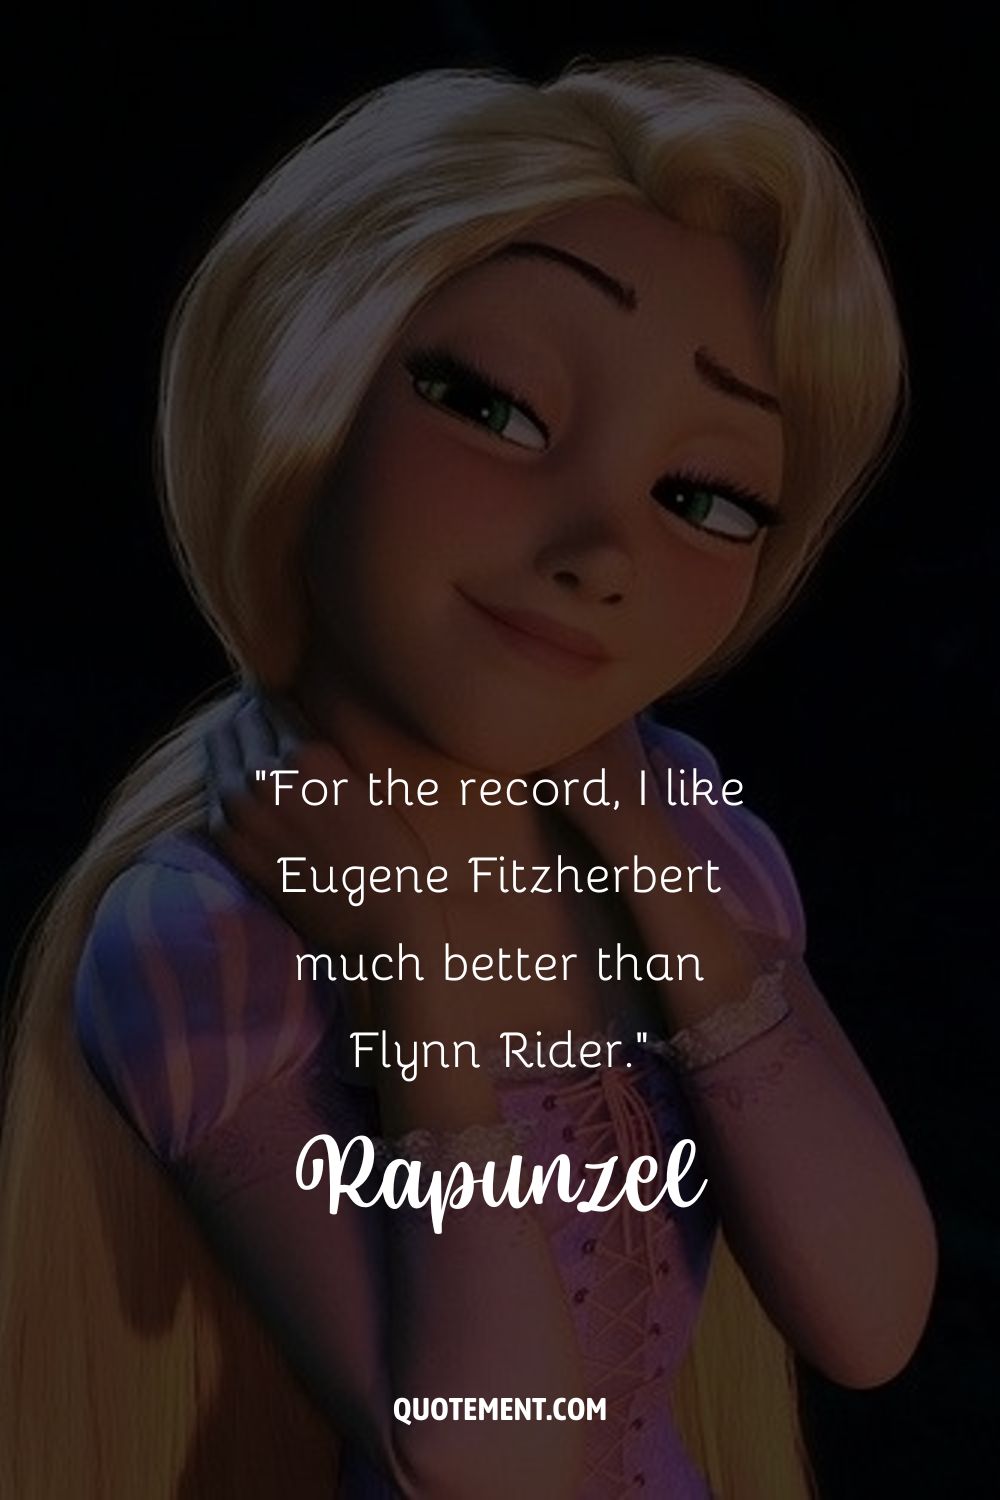 rapunzel from tangled wearing a pink dress representing tangled funny quote